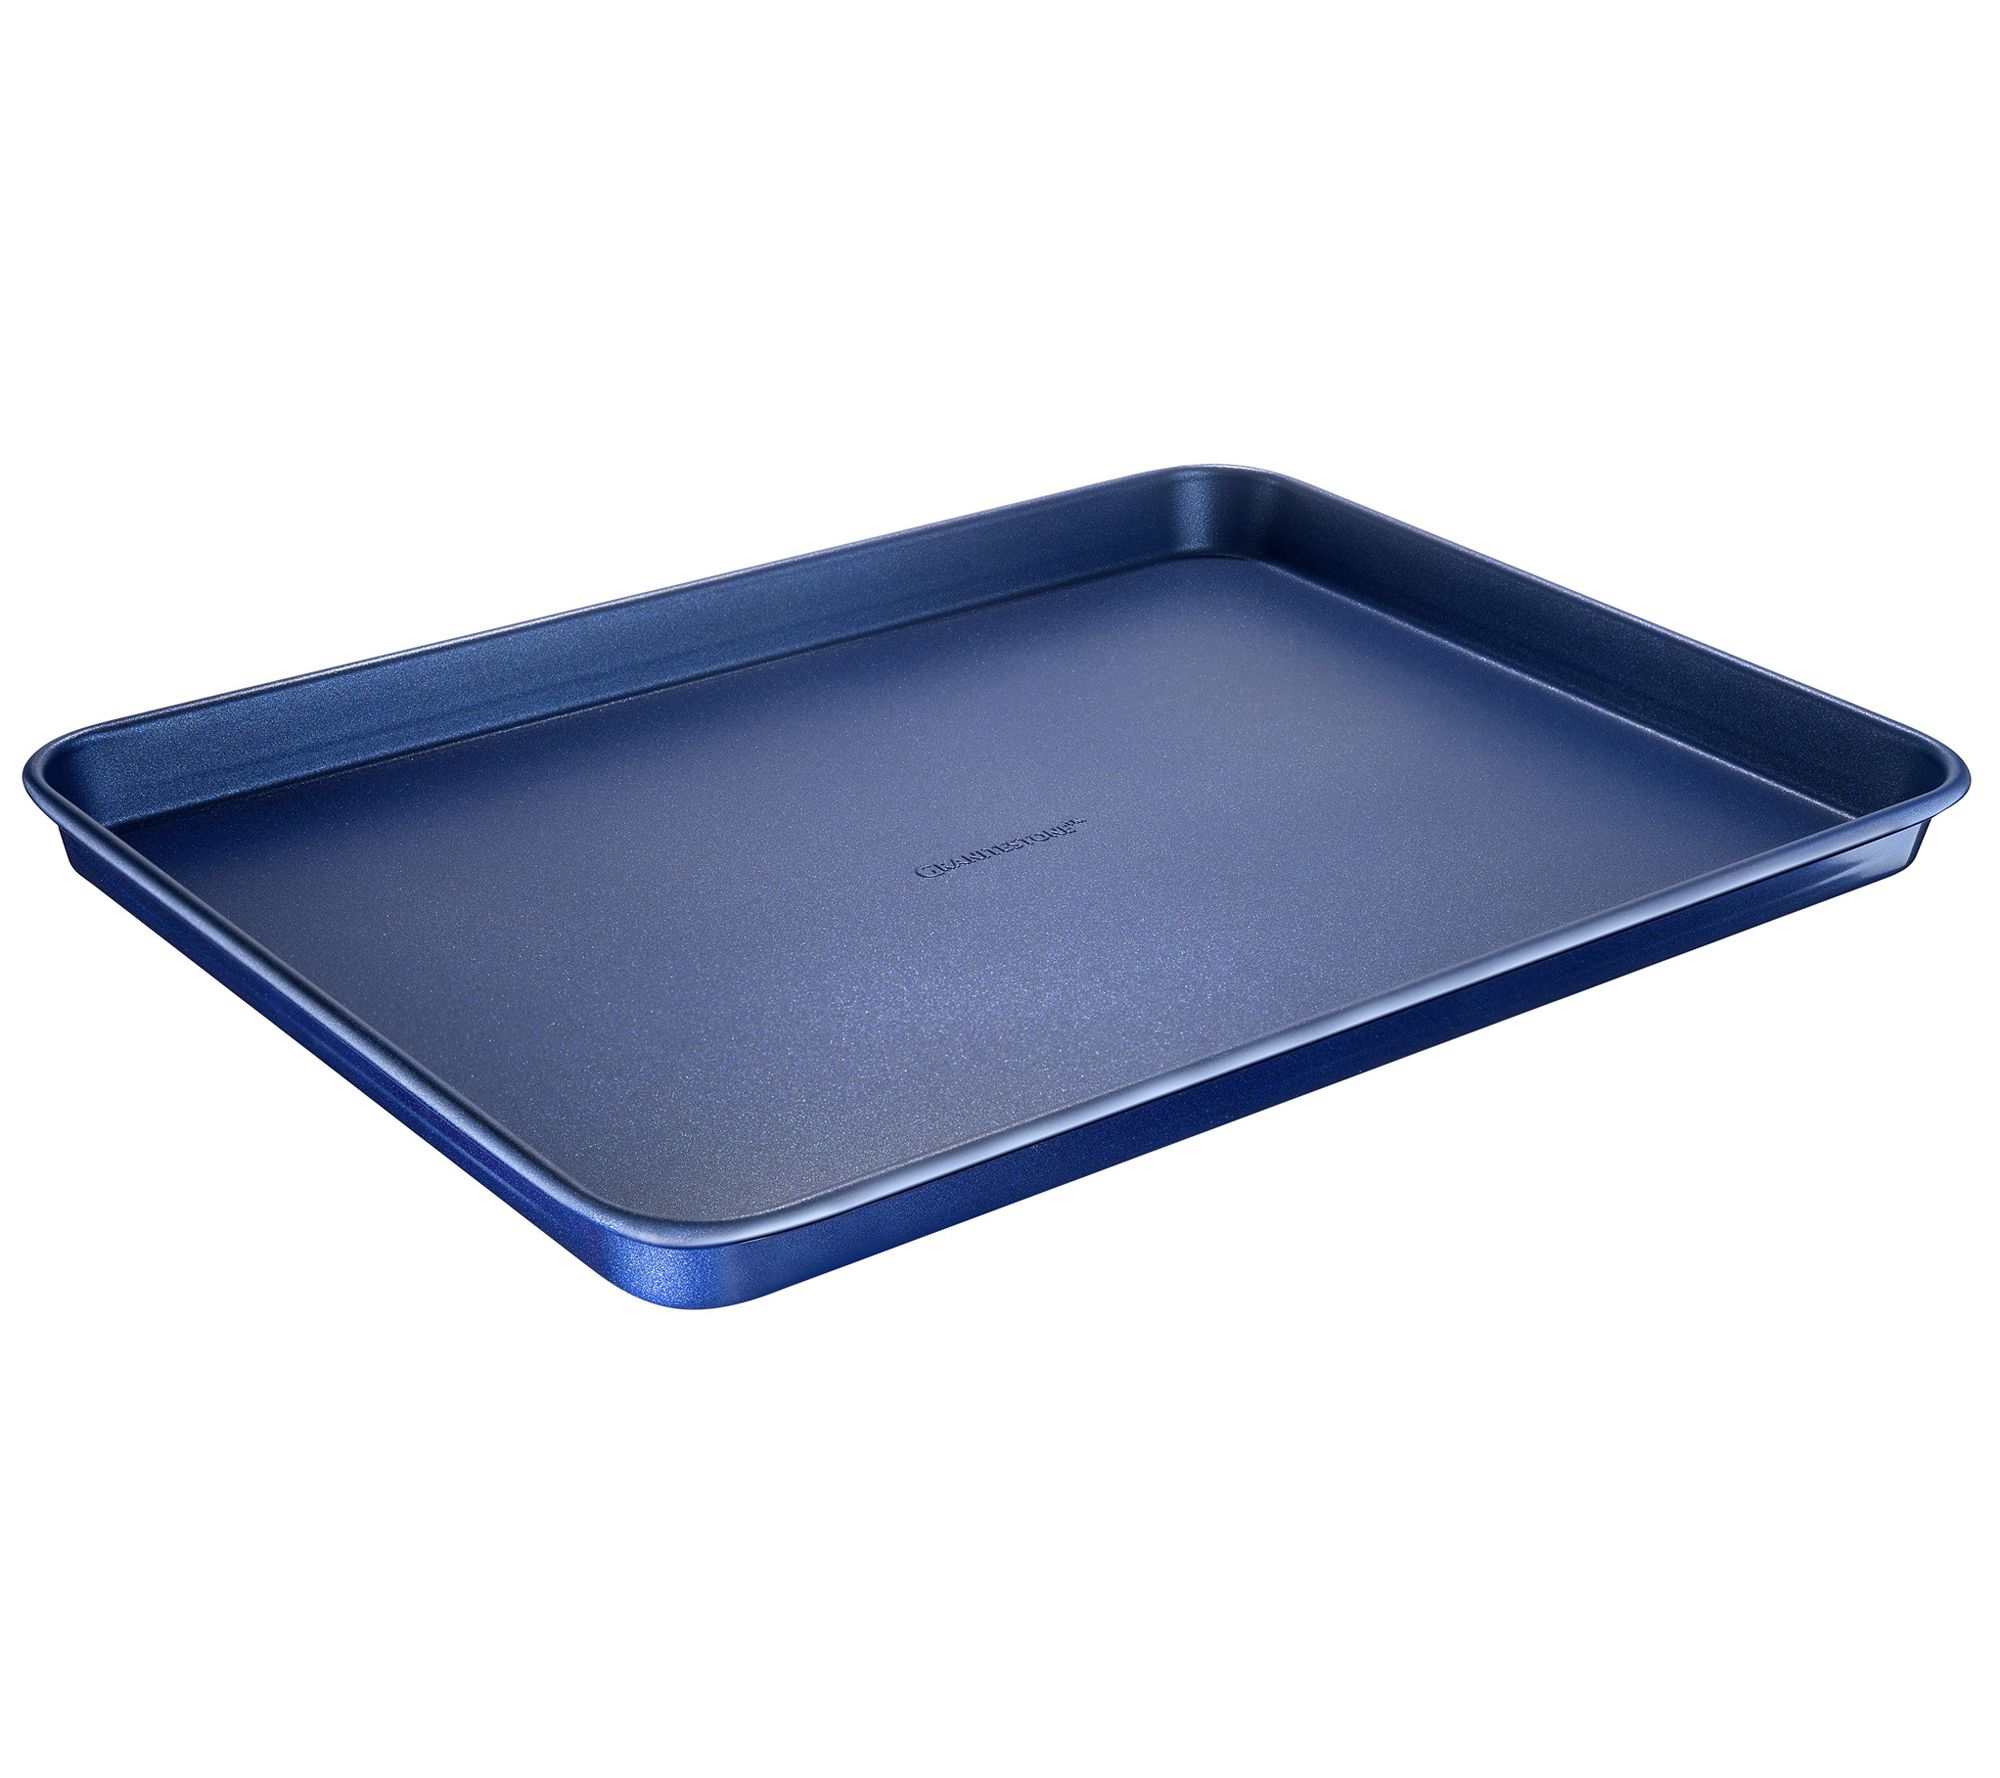 Large cookie sheet  Official BergHOFF Outlet